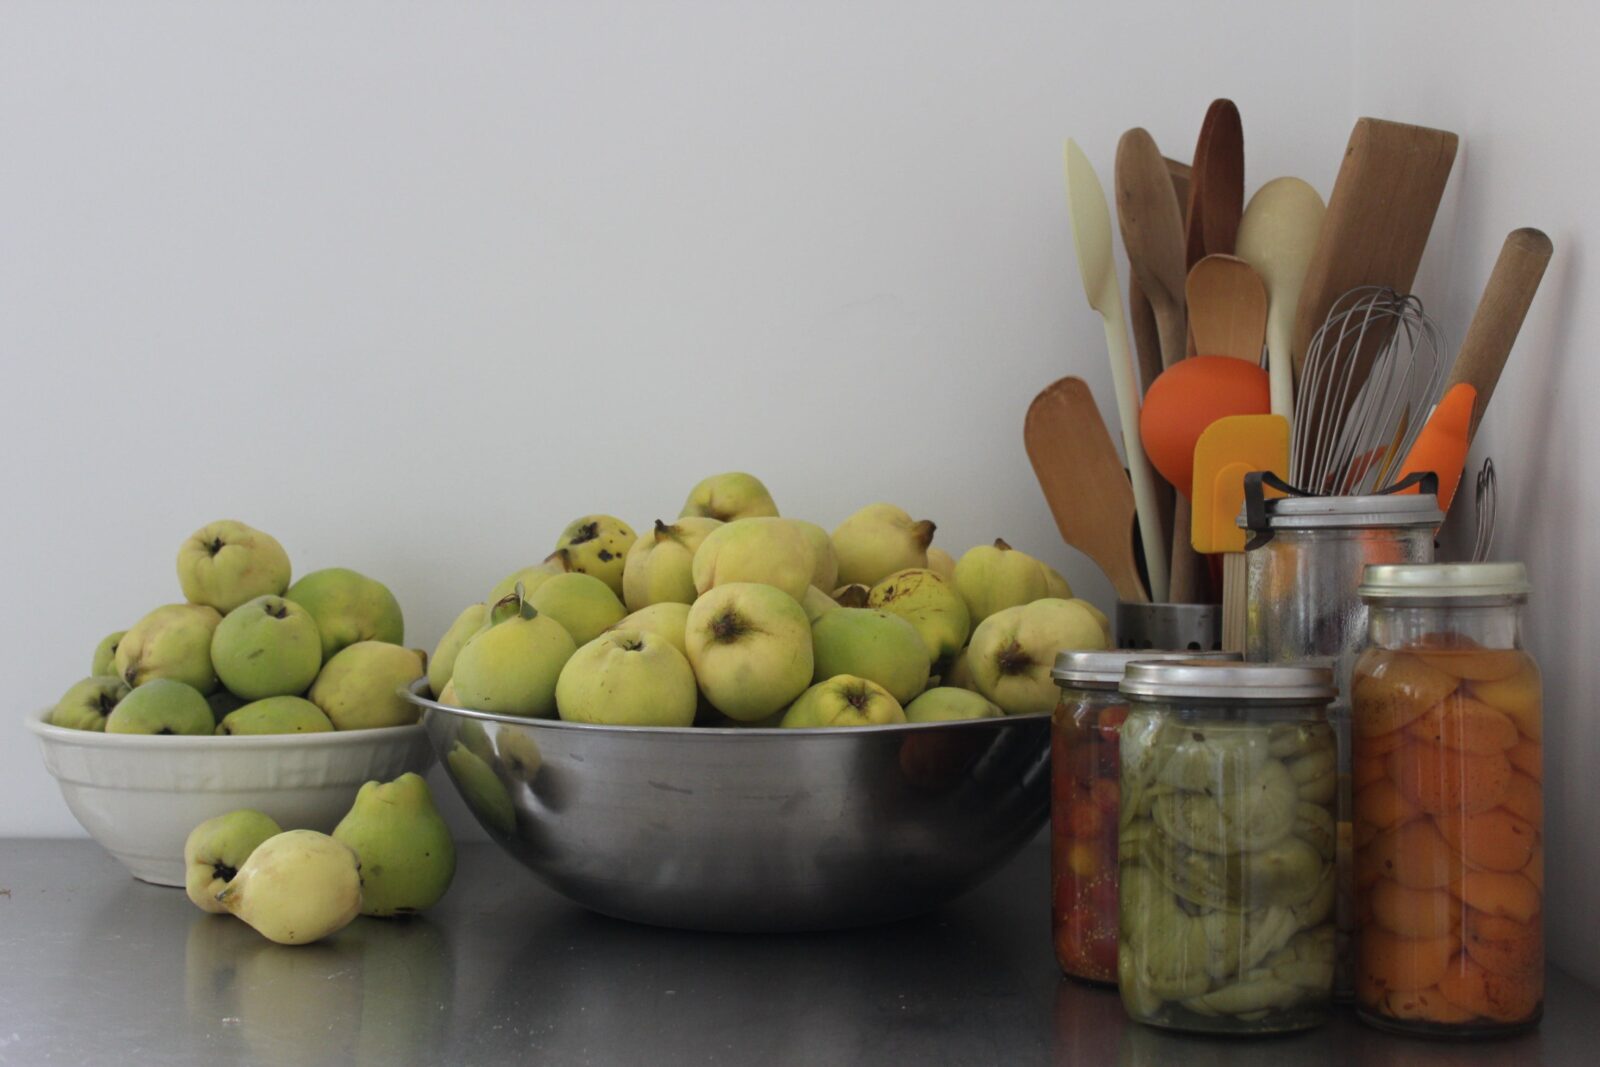 Bowls of quinces sitting on a bench with vacola jars of preserves and kitchen tools